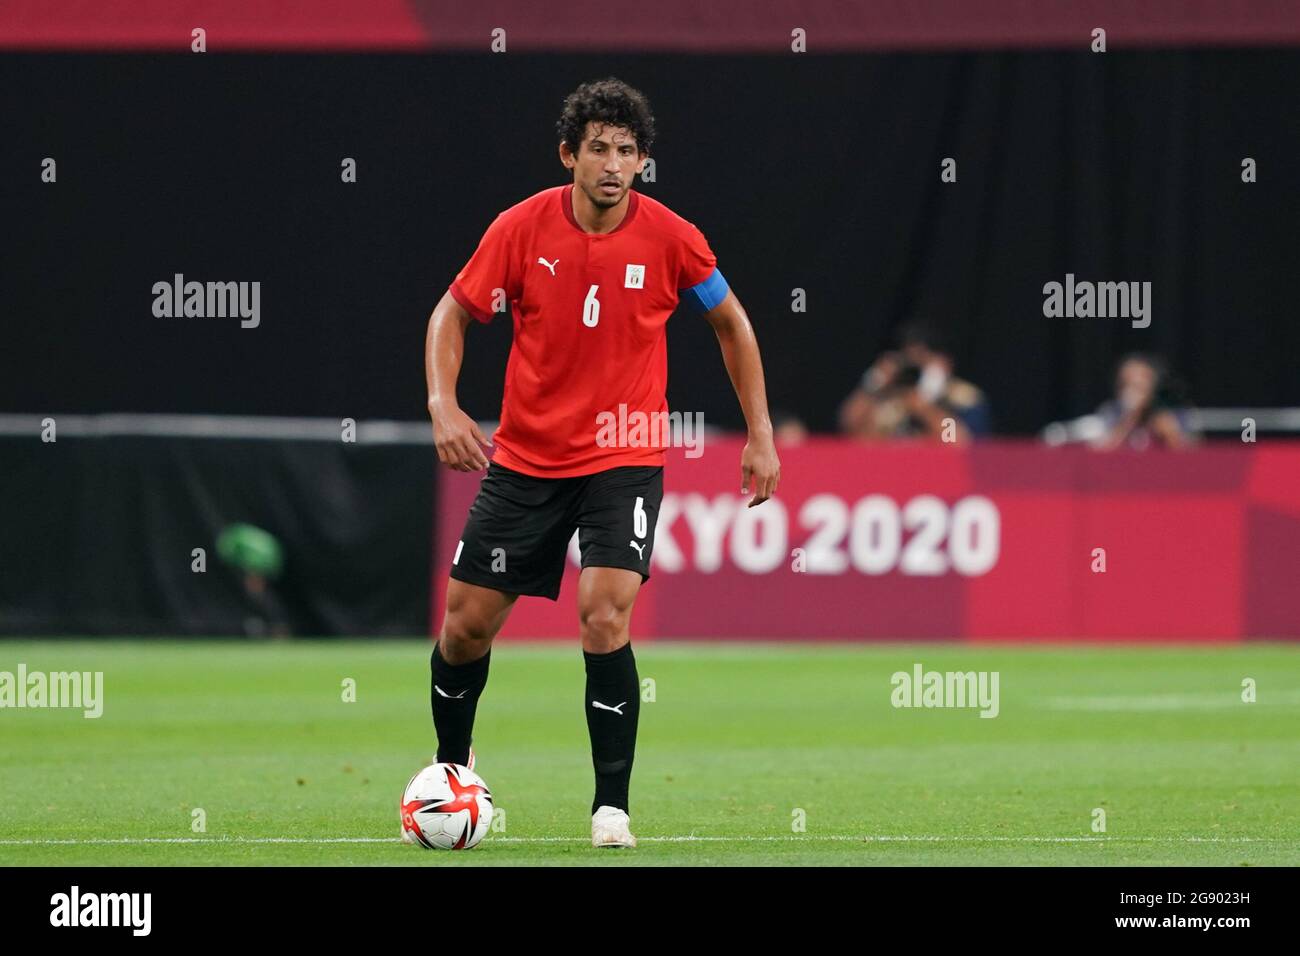 Sapporo, Japan. 22nd July, 2021. Captain Ahmed Hegazy (6 Egypt) controls the ball (action) during the Men's Olympic Football Tournament Tokyo 2020 match between Egypt and Spain at Sapporo Dome in Sapporo, Japan. Credit: SPP Sport Press Photo. /Alamy Live News Stock Photo